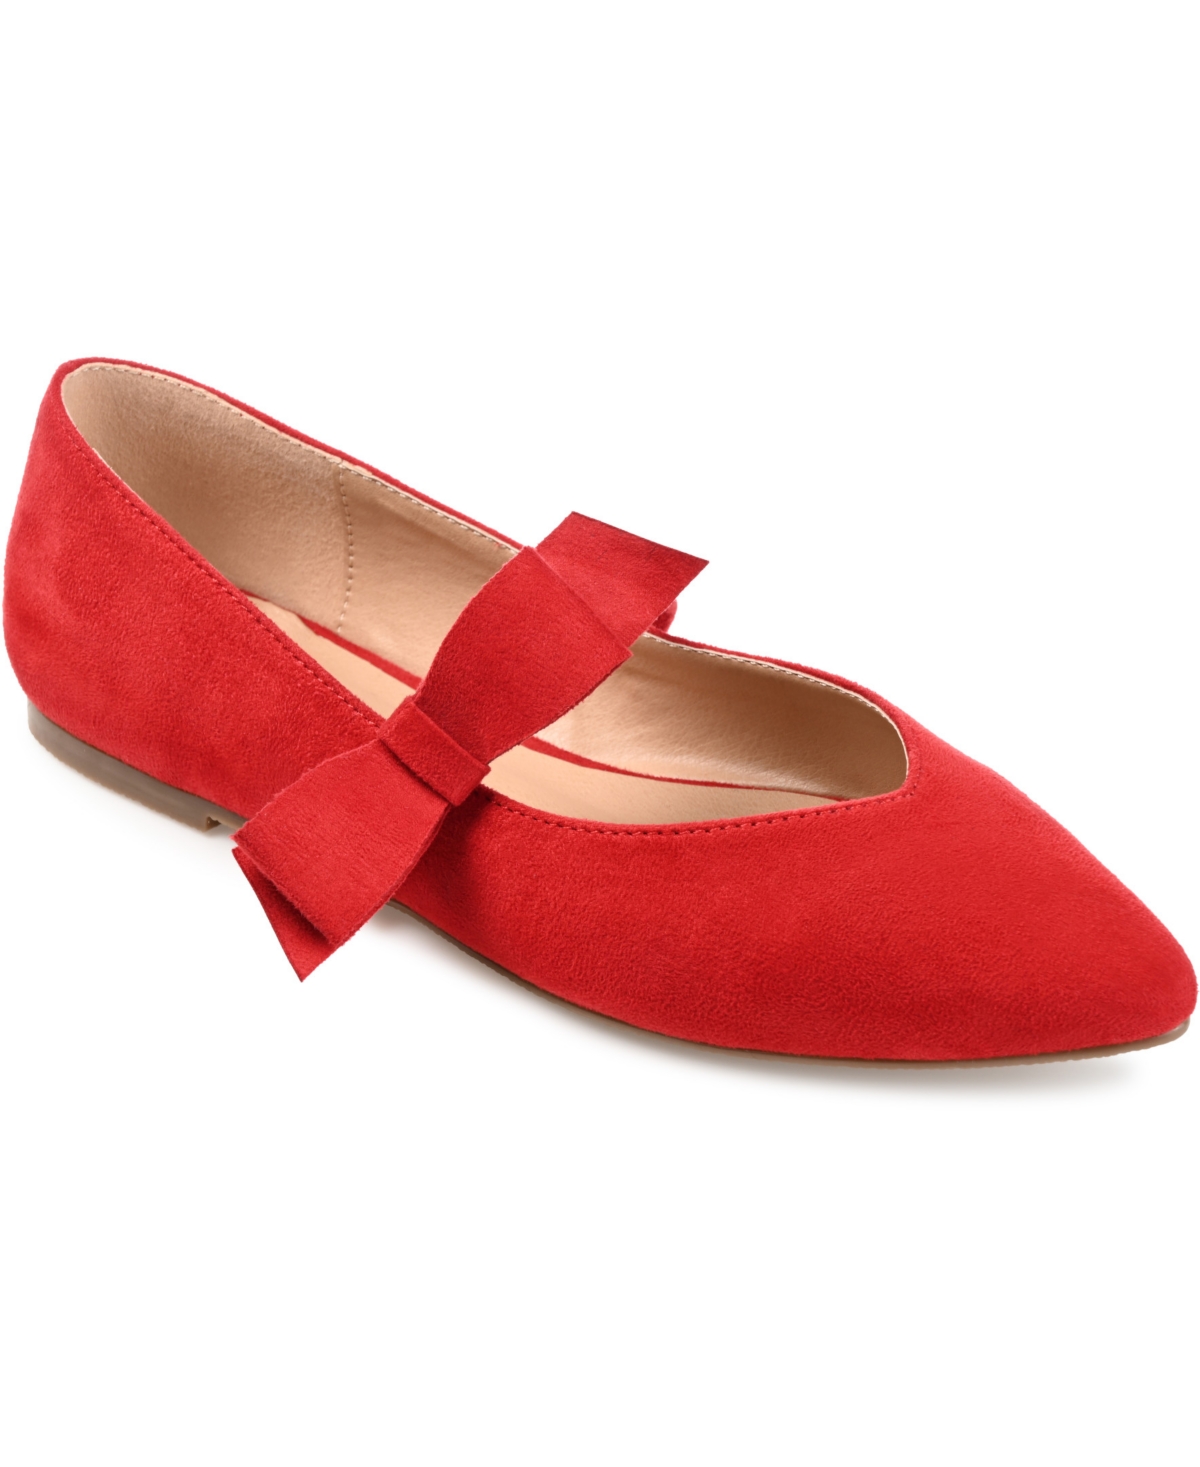 Retro Vintage Flats and Low Heel Shoes Journee Collection Womens Aizlynn Mary Jane Flats - Red $56.24 AT vintagedancer.com